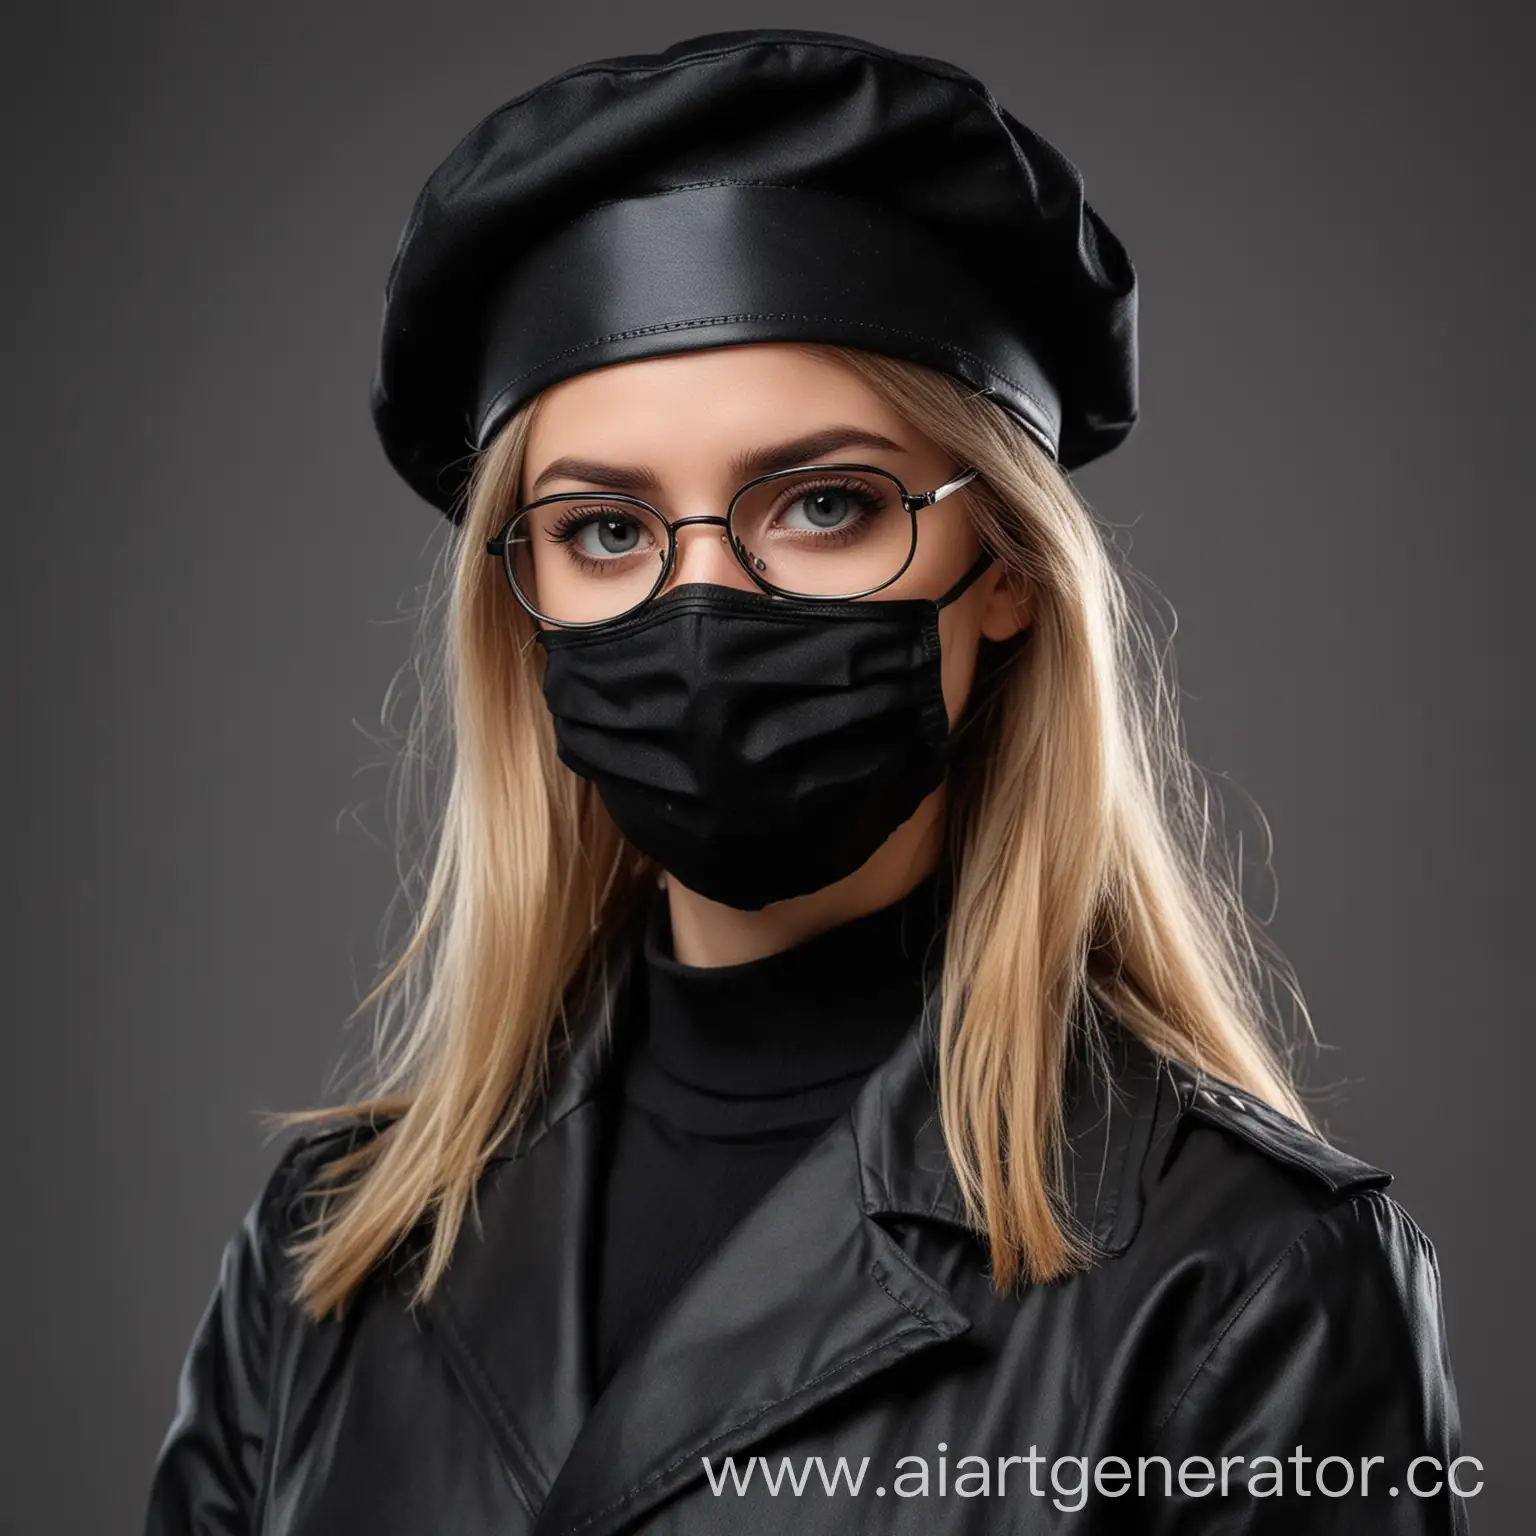 Girl-Doctor-in-Aviator-Glasses-and-Medical-Mask-with-Black-Beret